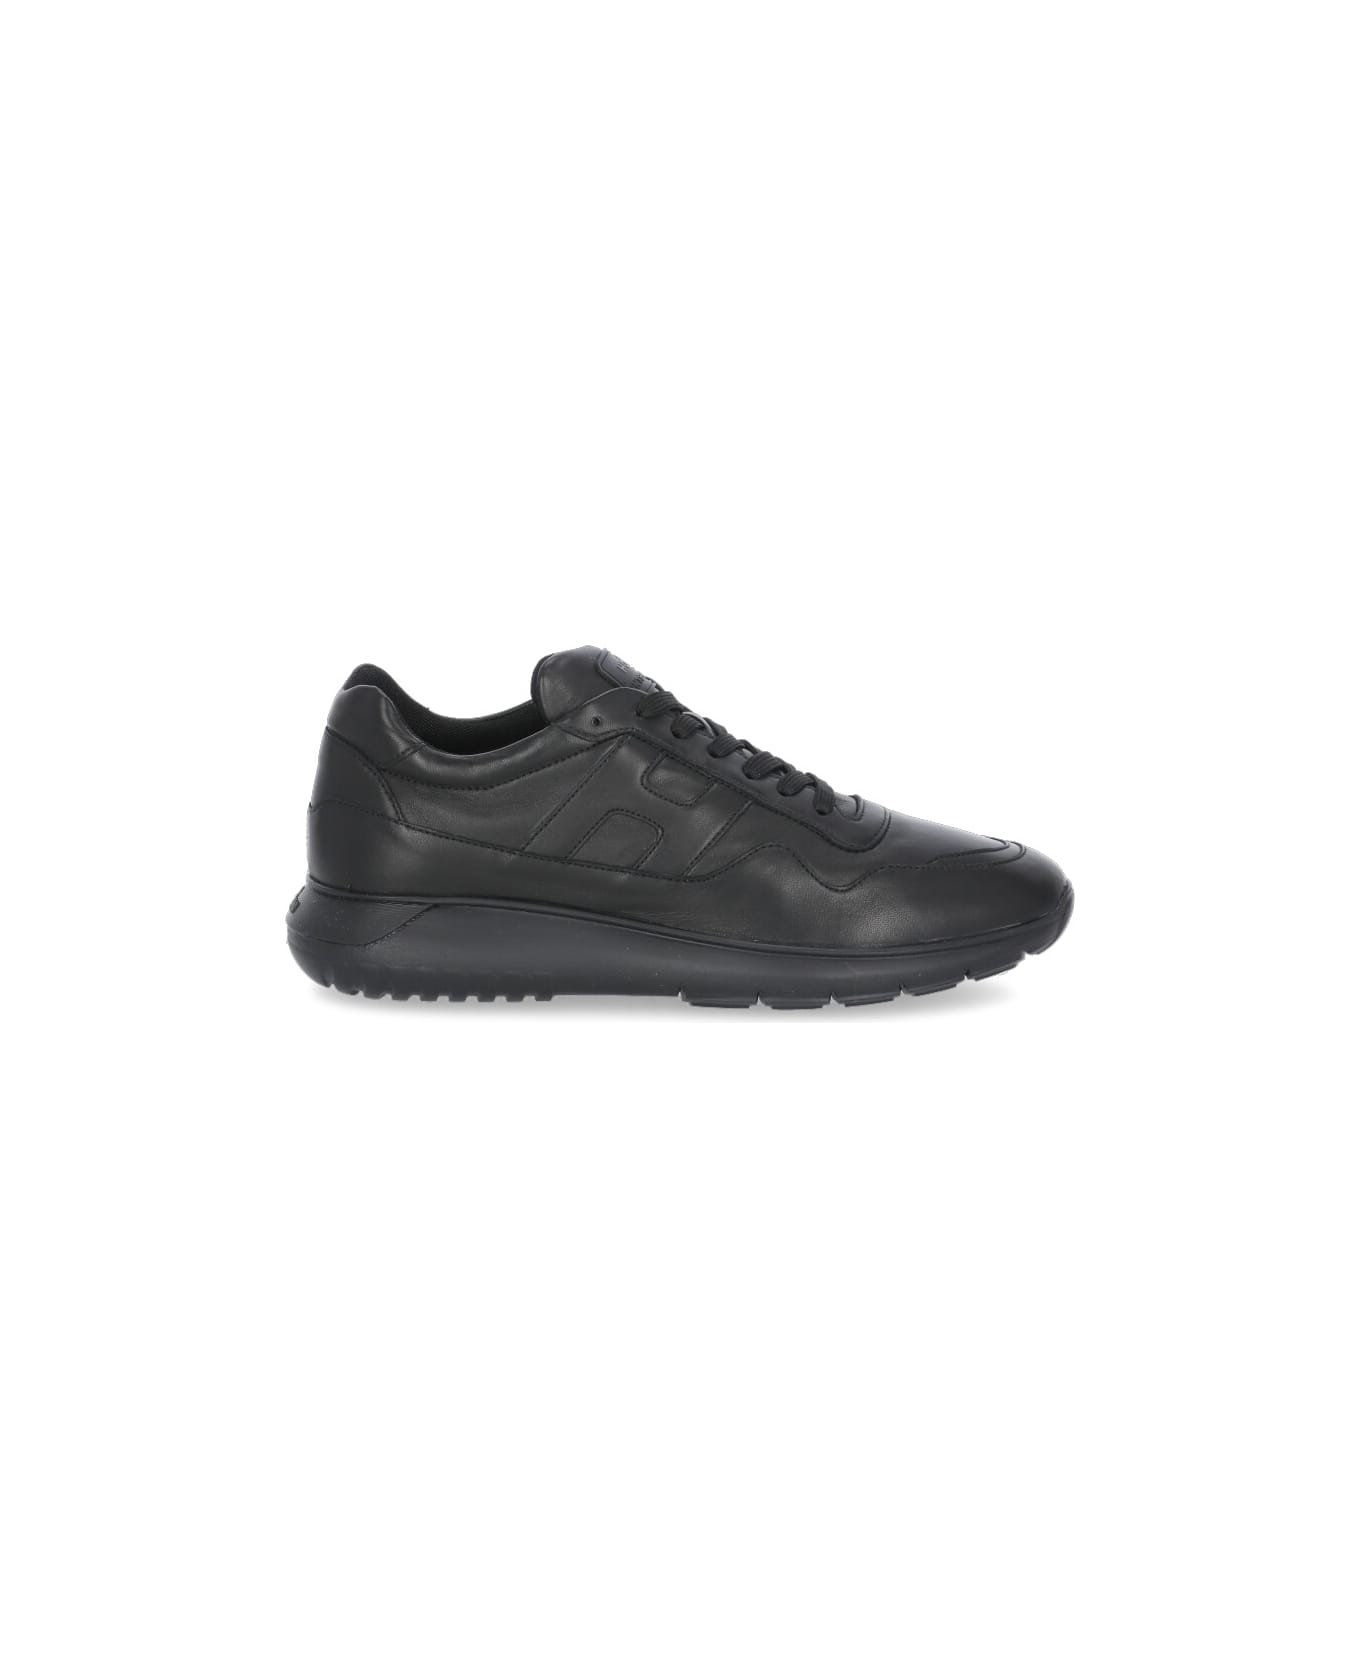 Hogan Sneakers "interactive³" In Leather - Black スニーカー